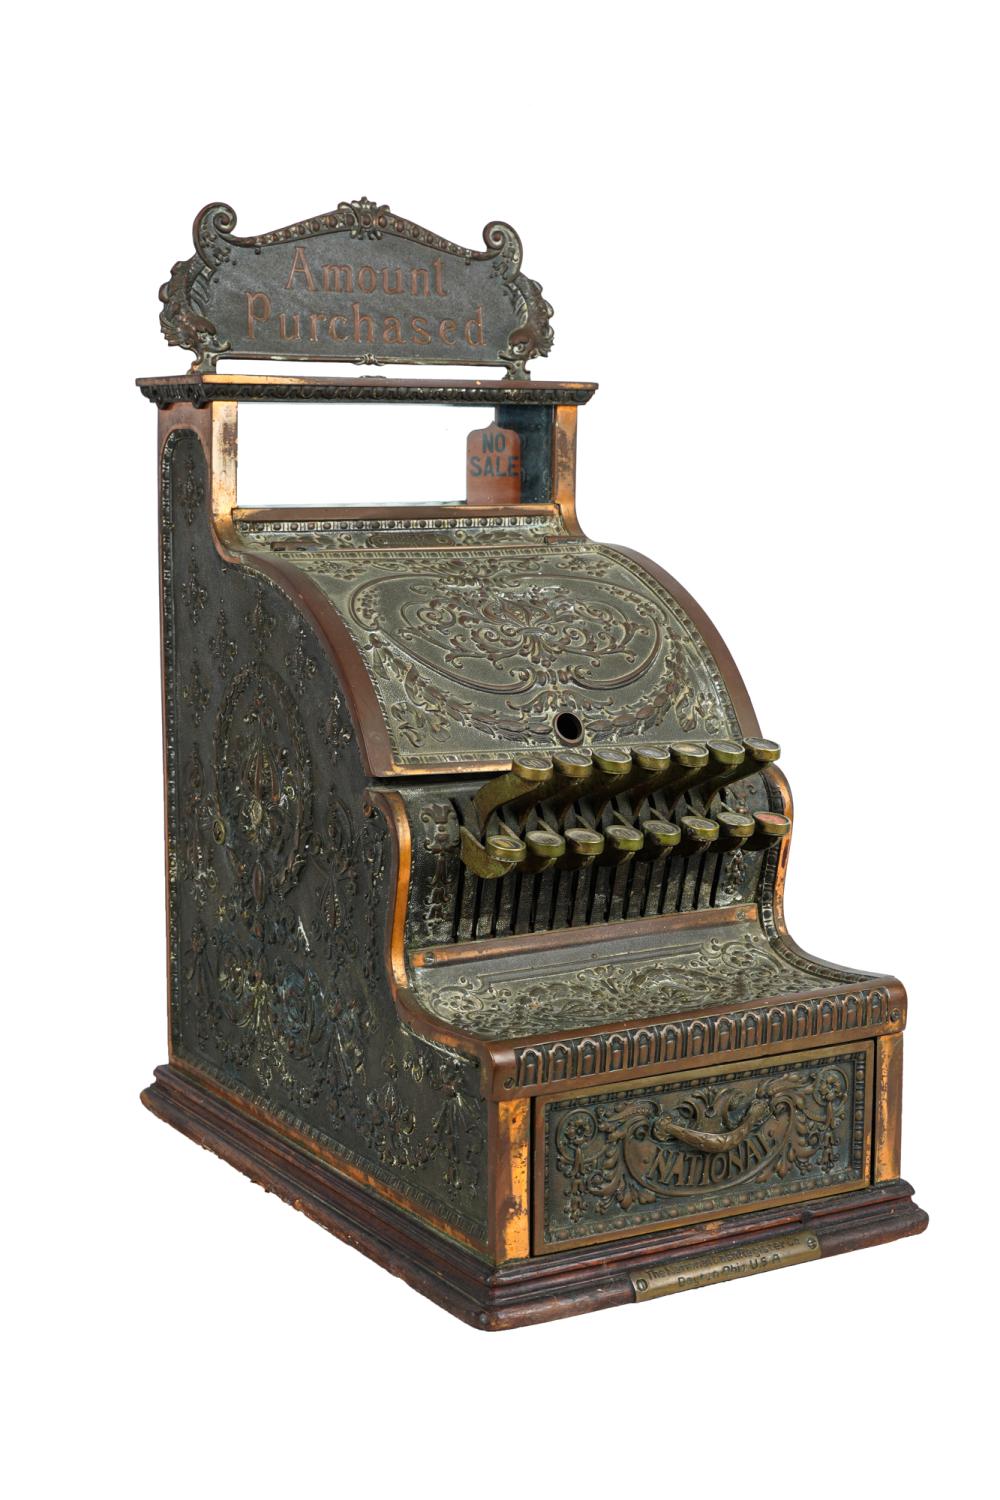 NATIONAL CASH REGISTER10 inches wide;